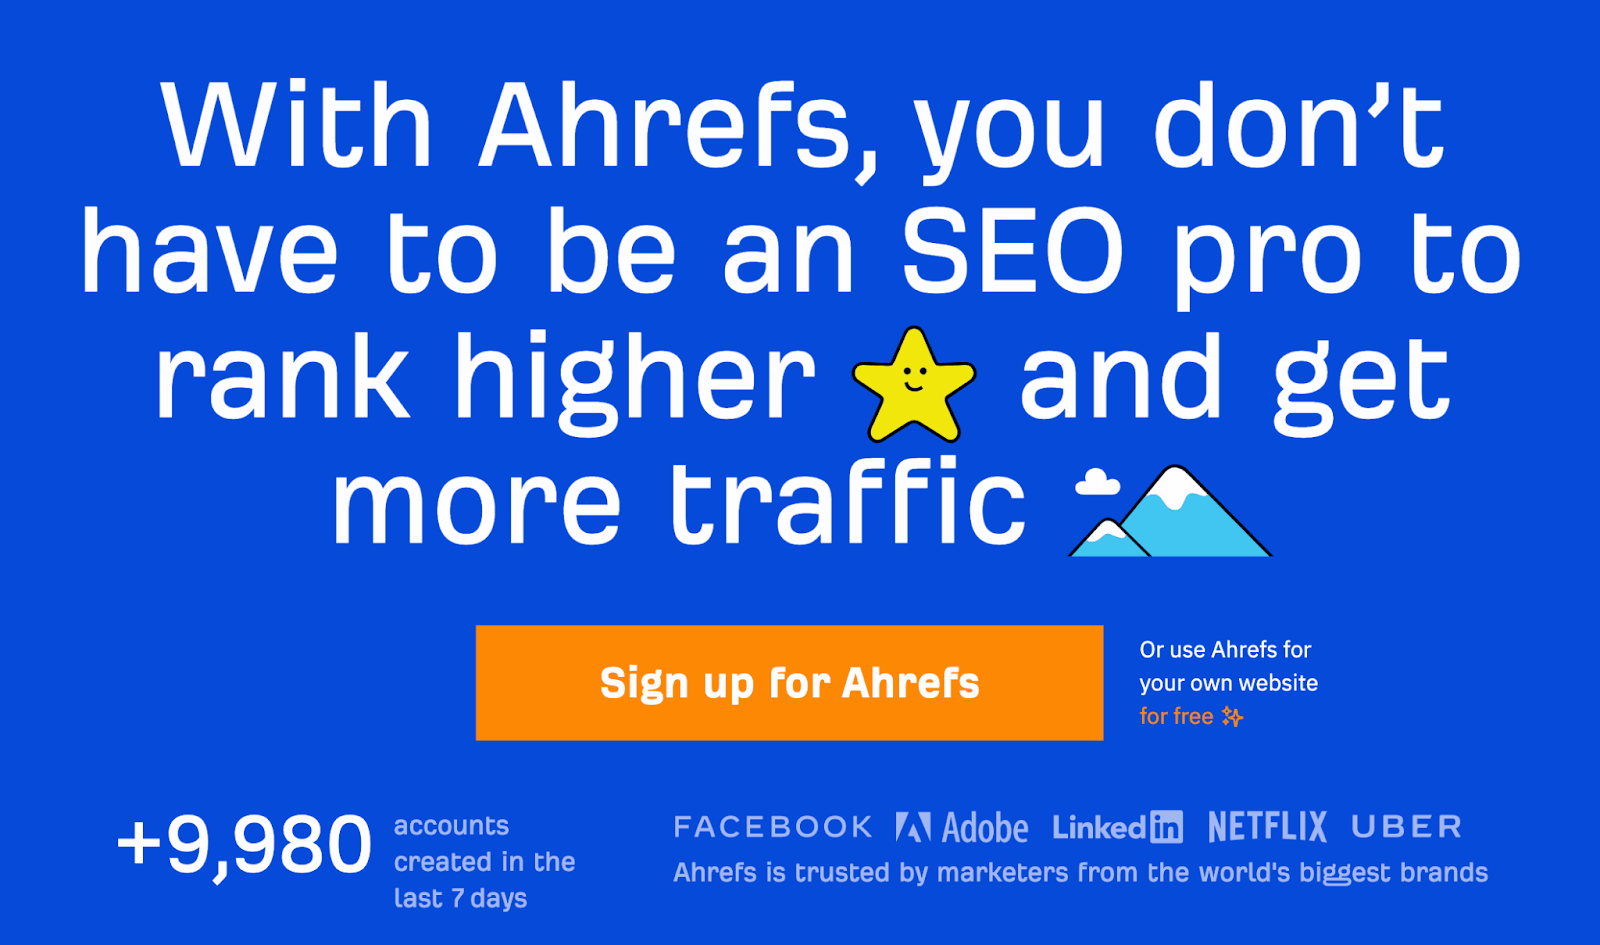 Ahrefs' homepage positioning and CTA button below to sign up for Ahrefs 